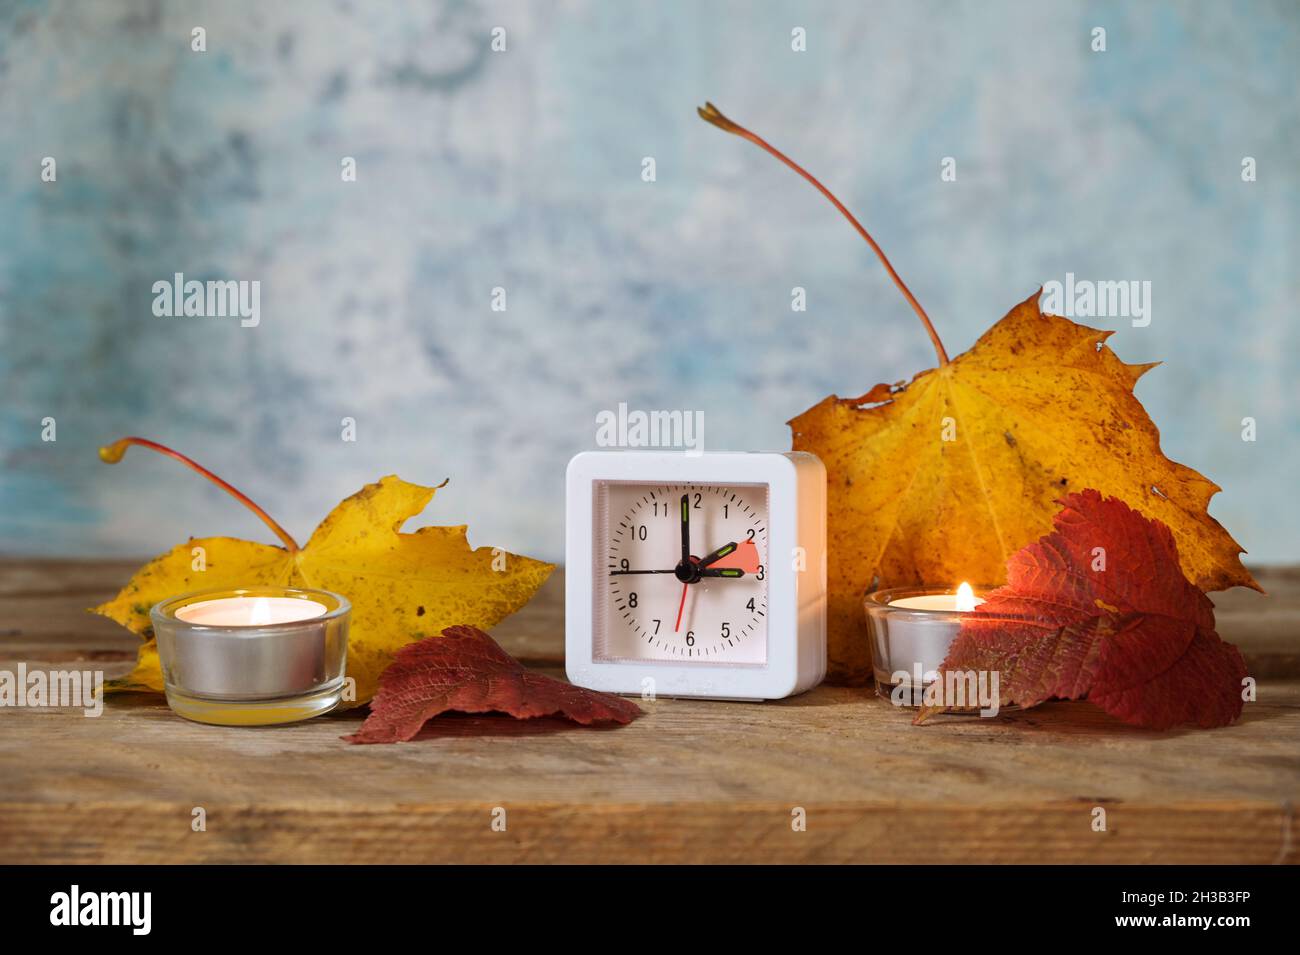 Changing from summer to winter time in October, small alarm clock set back one hour, autumn leaves and candles on rustic wood, light blue background, Stock Photo